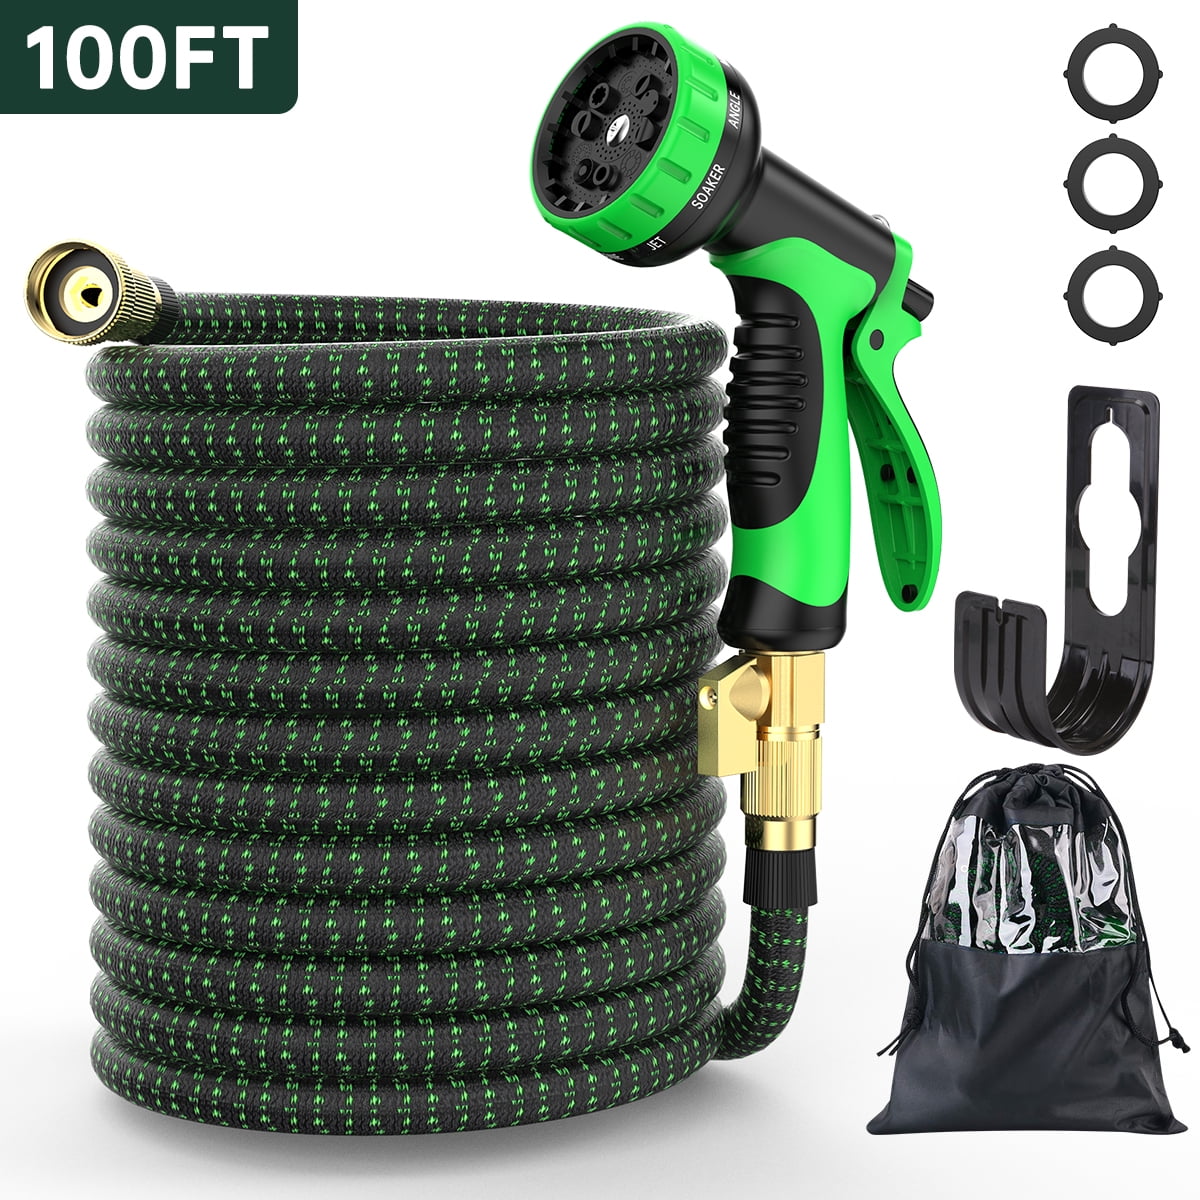 HOSPAIP Garden Hose 100 ft Water Hose with 10 Function Hose Nozzle Flexible Expandable Garden Hose with Brass Fittings Durable Leakproof Expanding Yard Hose Car Wash Hose Pipe Green Black 